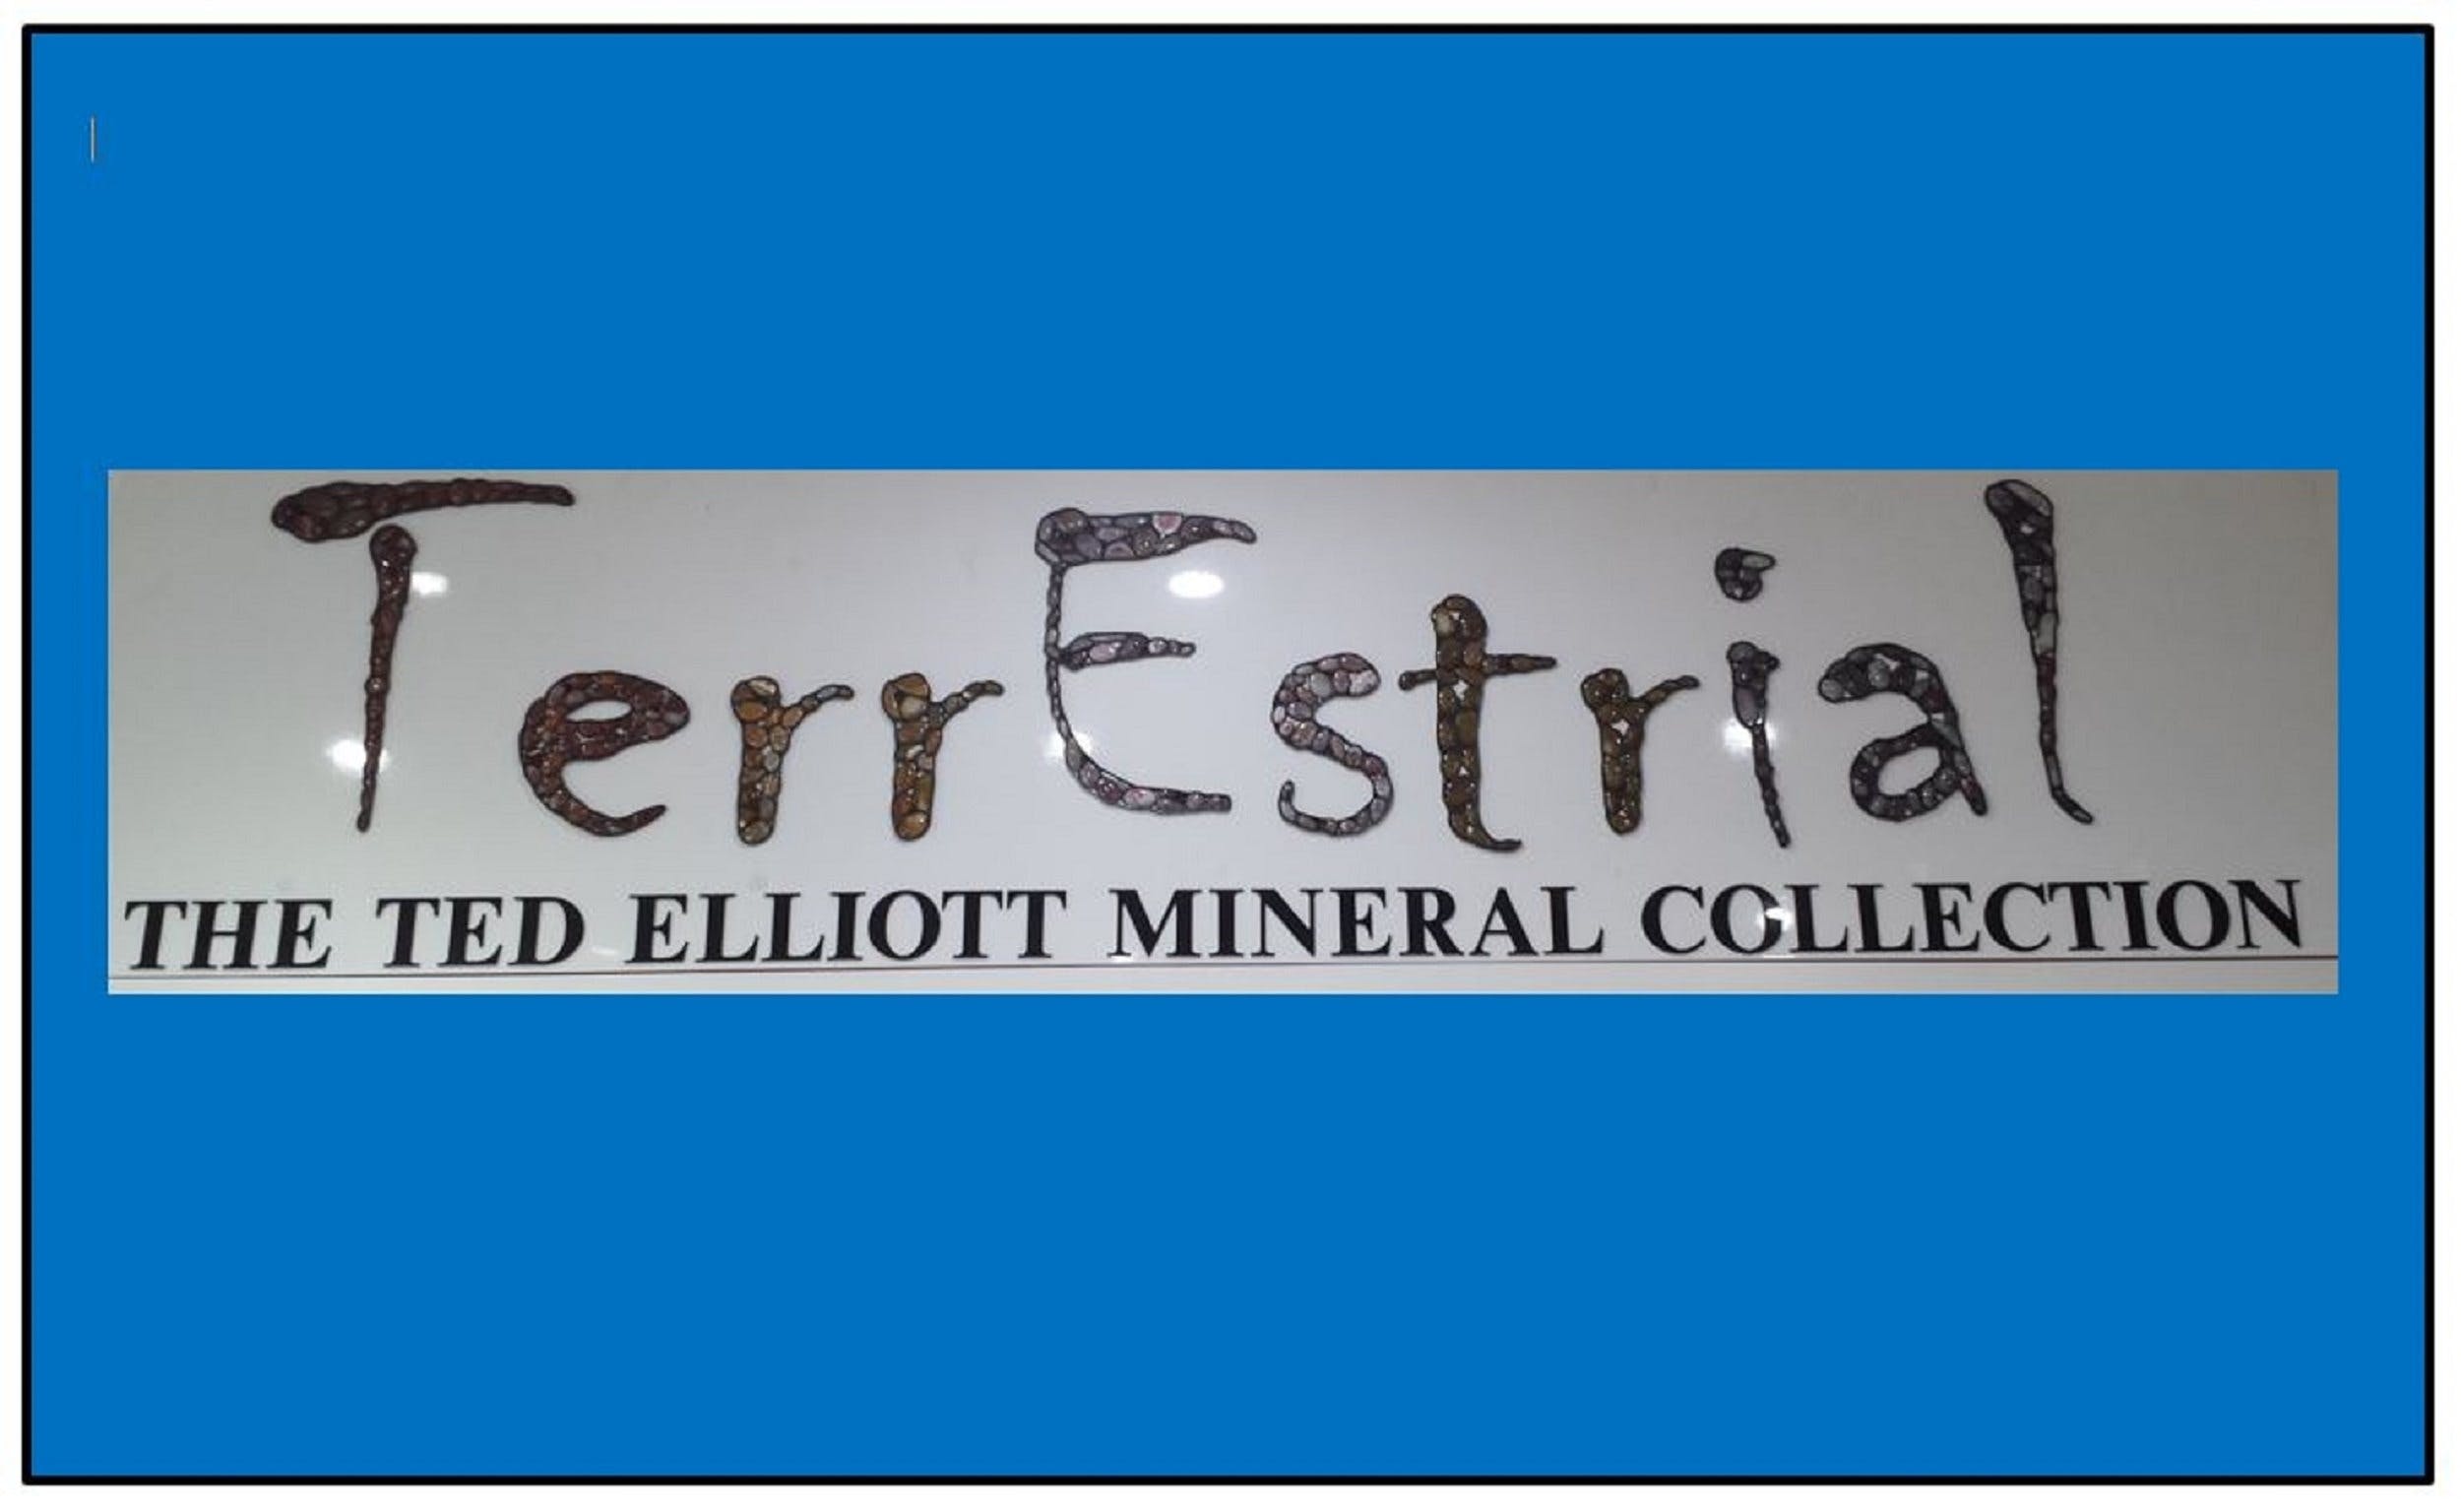 The Ted Elliott Mineral Collection - Surfers Gold Coast